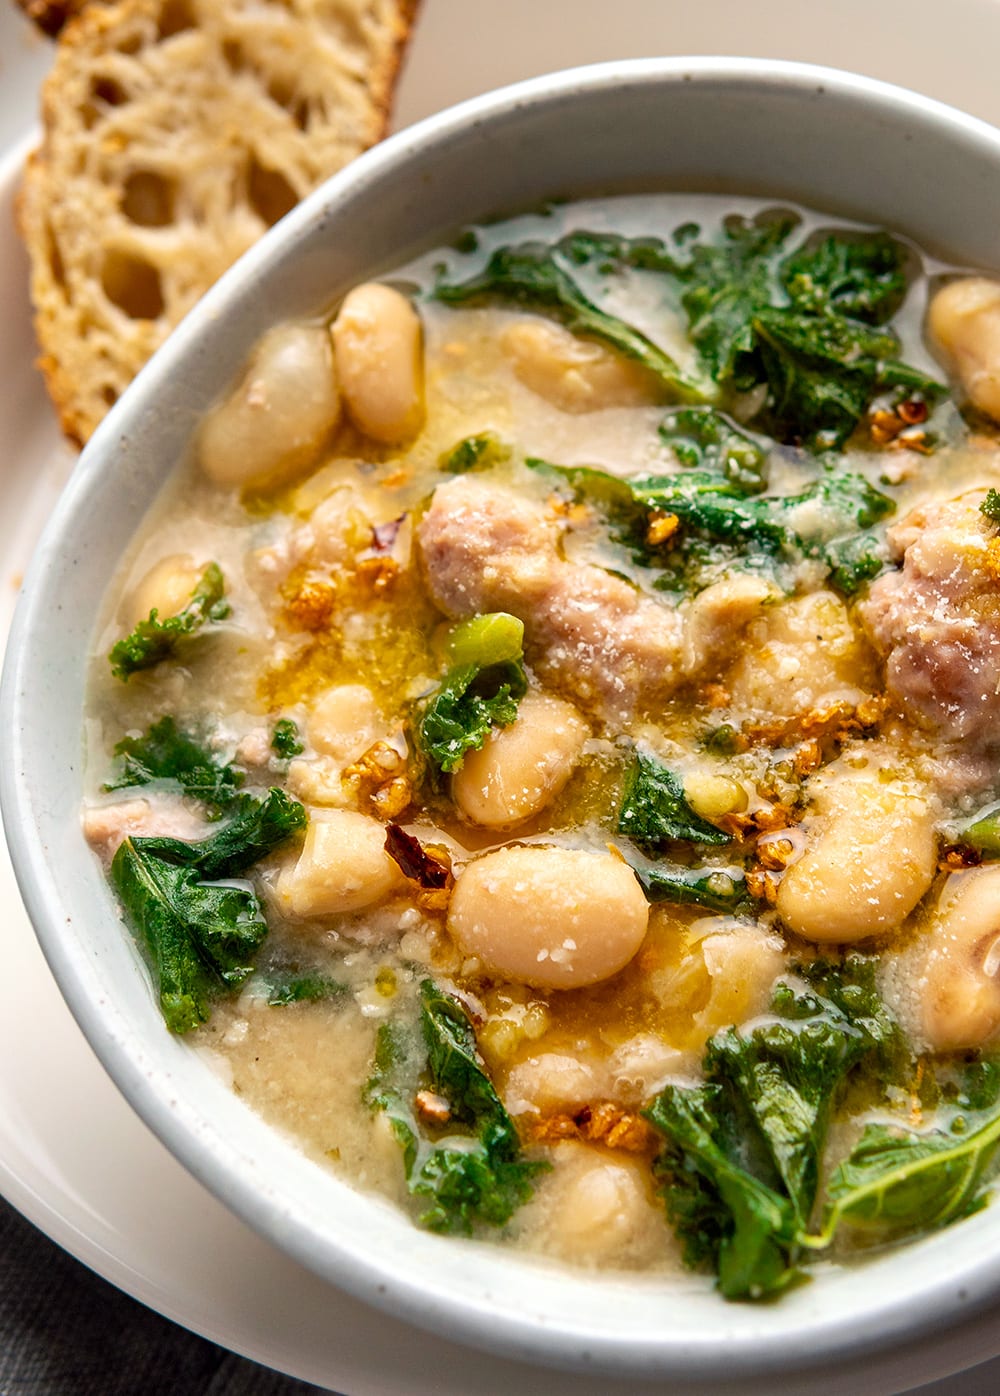 Instant Pot Bean Stew With Sausage, Kale & Chili Garlic Oil